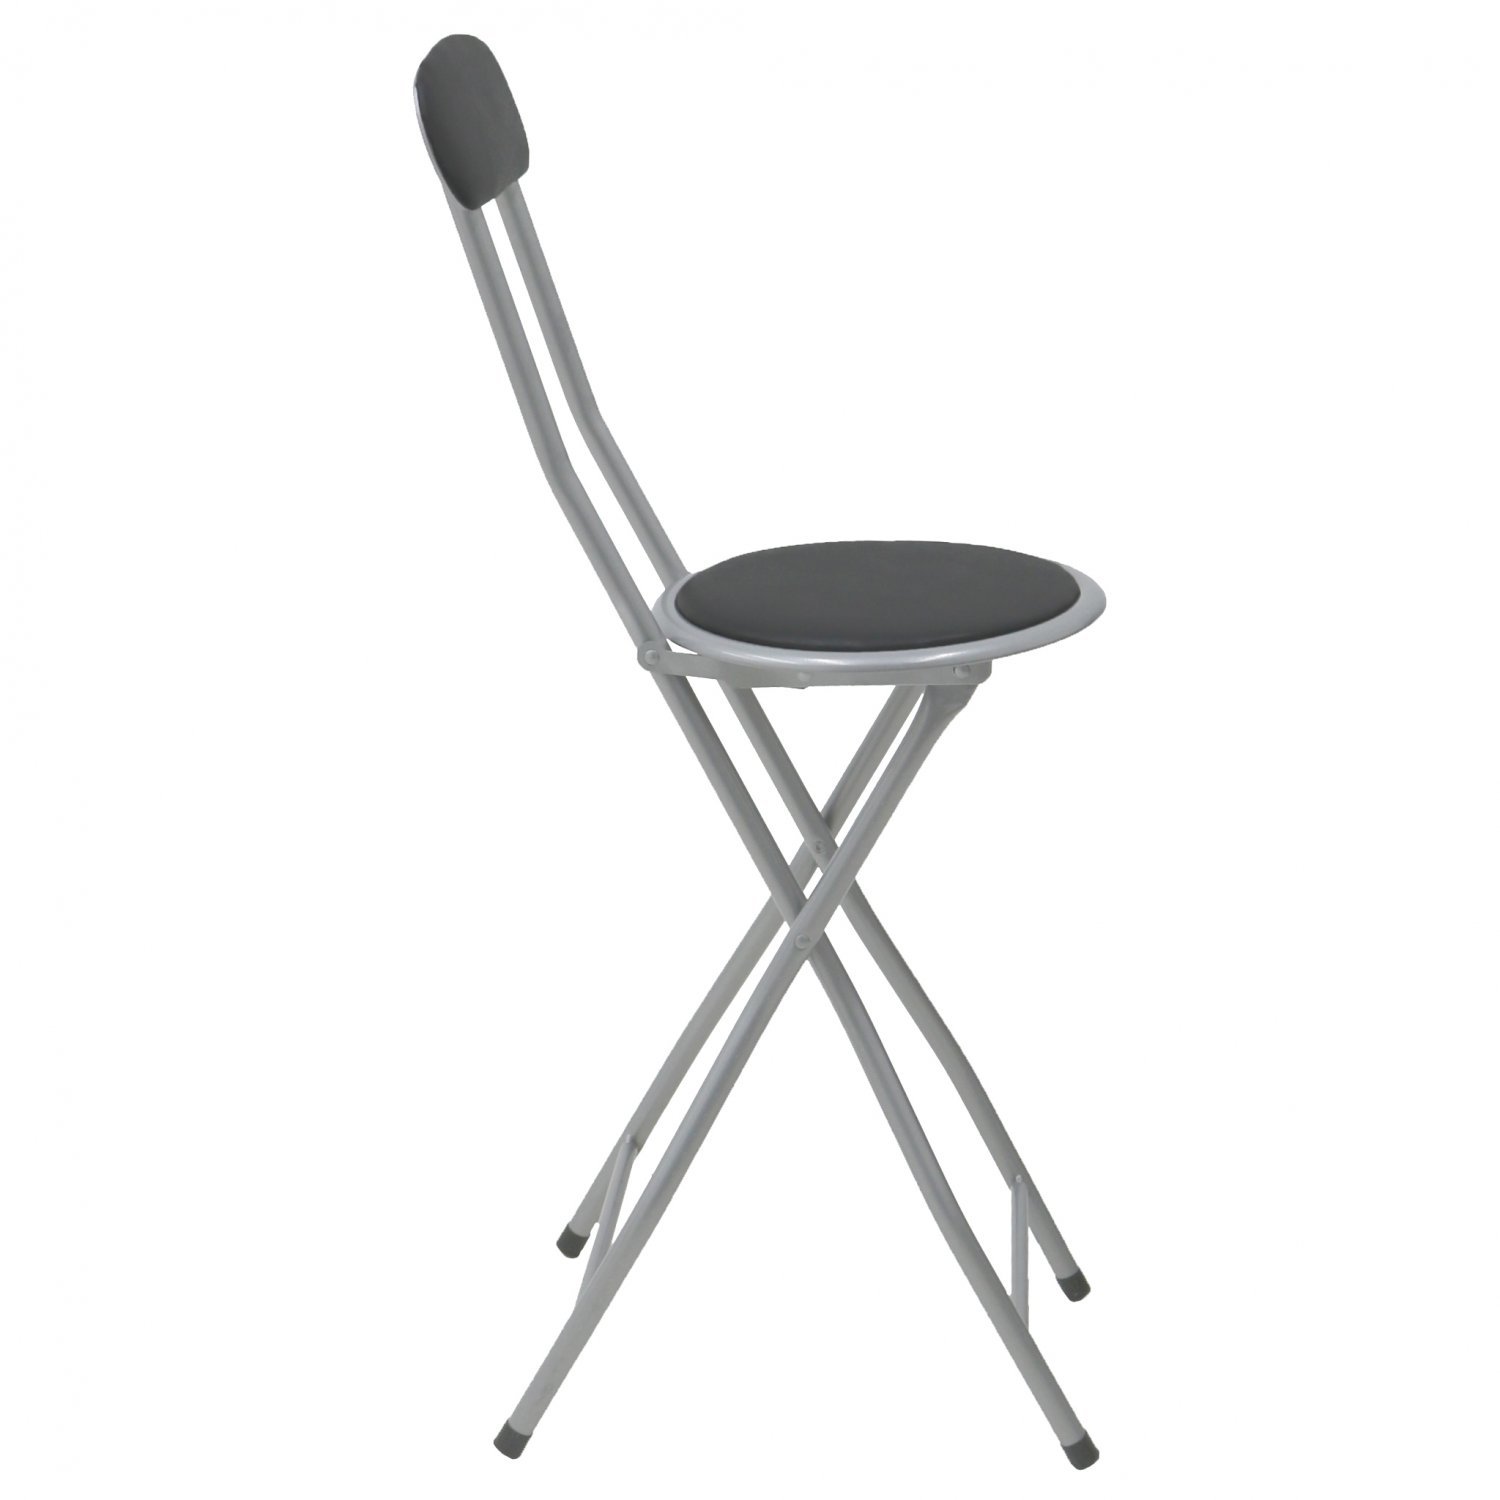 BLACK FOLDING HIGH CHAIR SEAT ROUND BAR STOOL BREAKFAST PADDED HOME KITCHEN NEW 